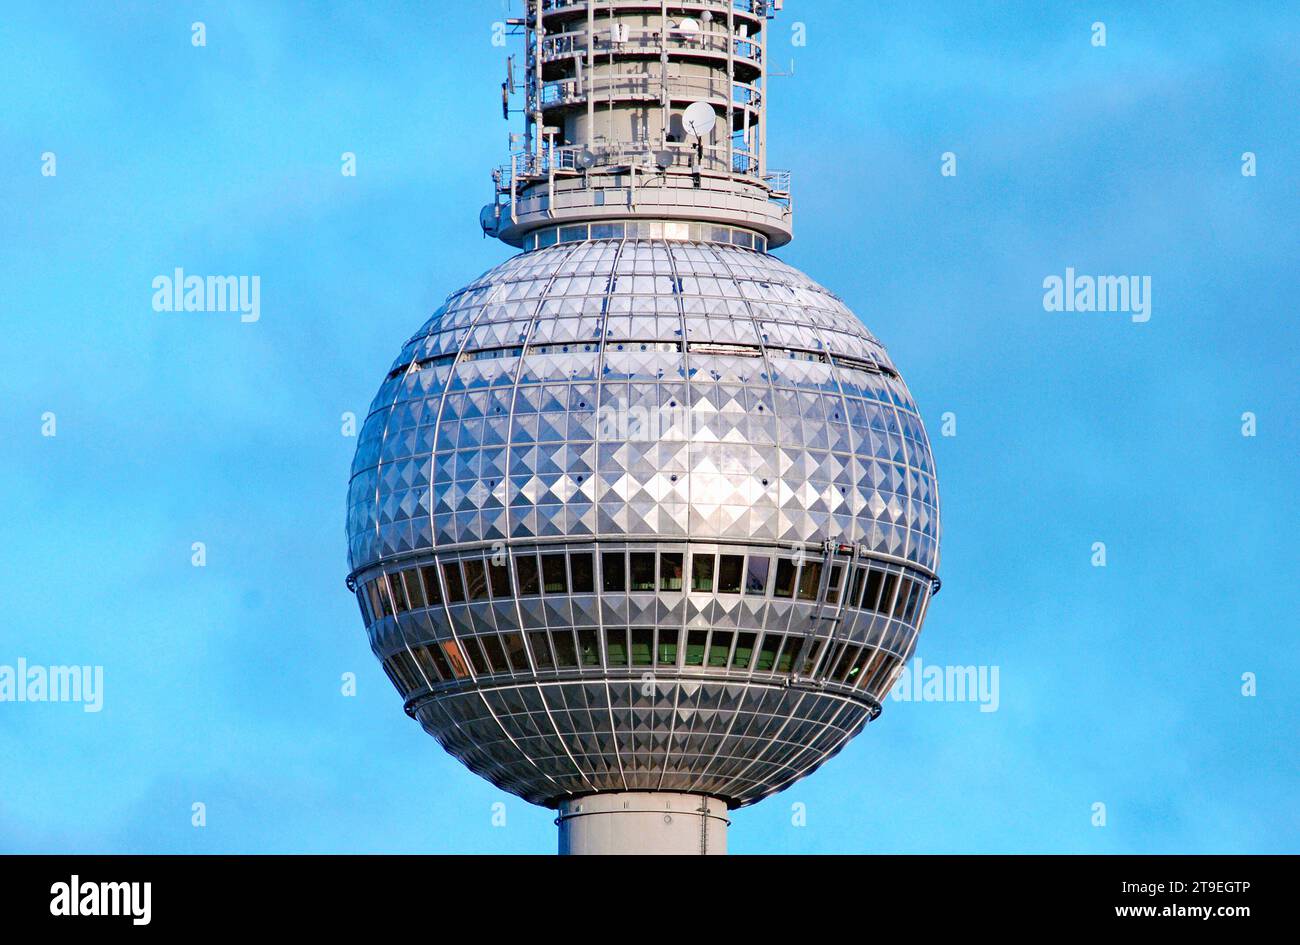 Berliner Fernsehturmkugel mit erster Schneehaube am Morgen *** Berlin TV tower sphere with first snow cover in the morning Credit: Imago/Alamy Live News Stock Photo